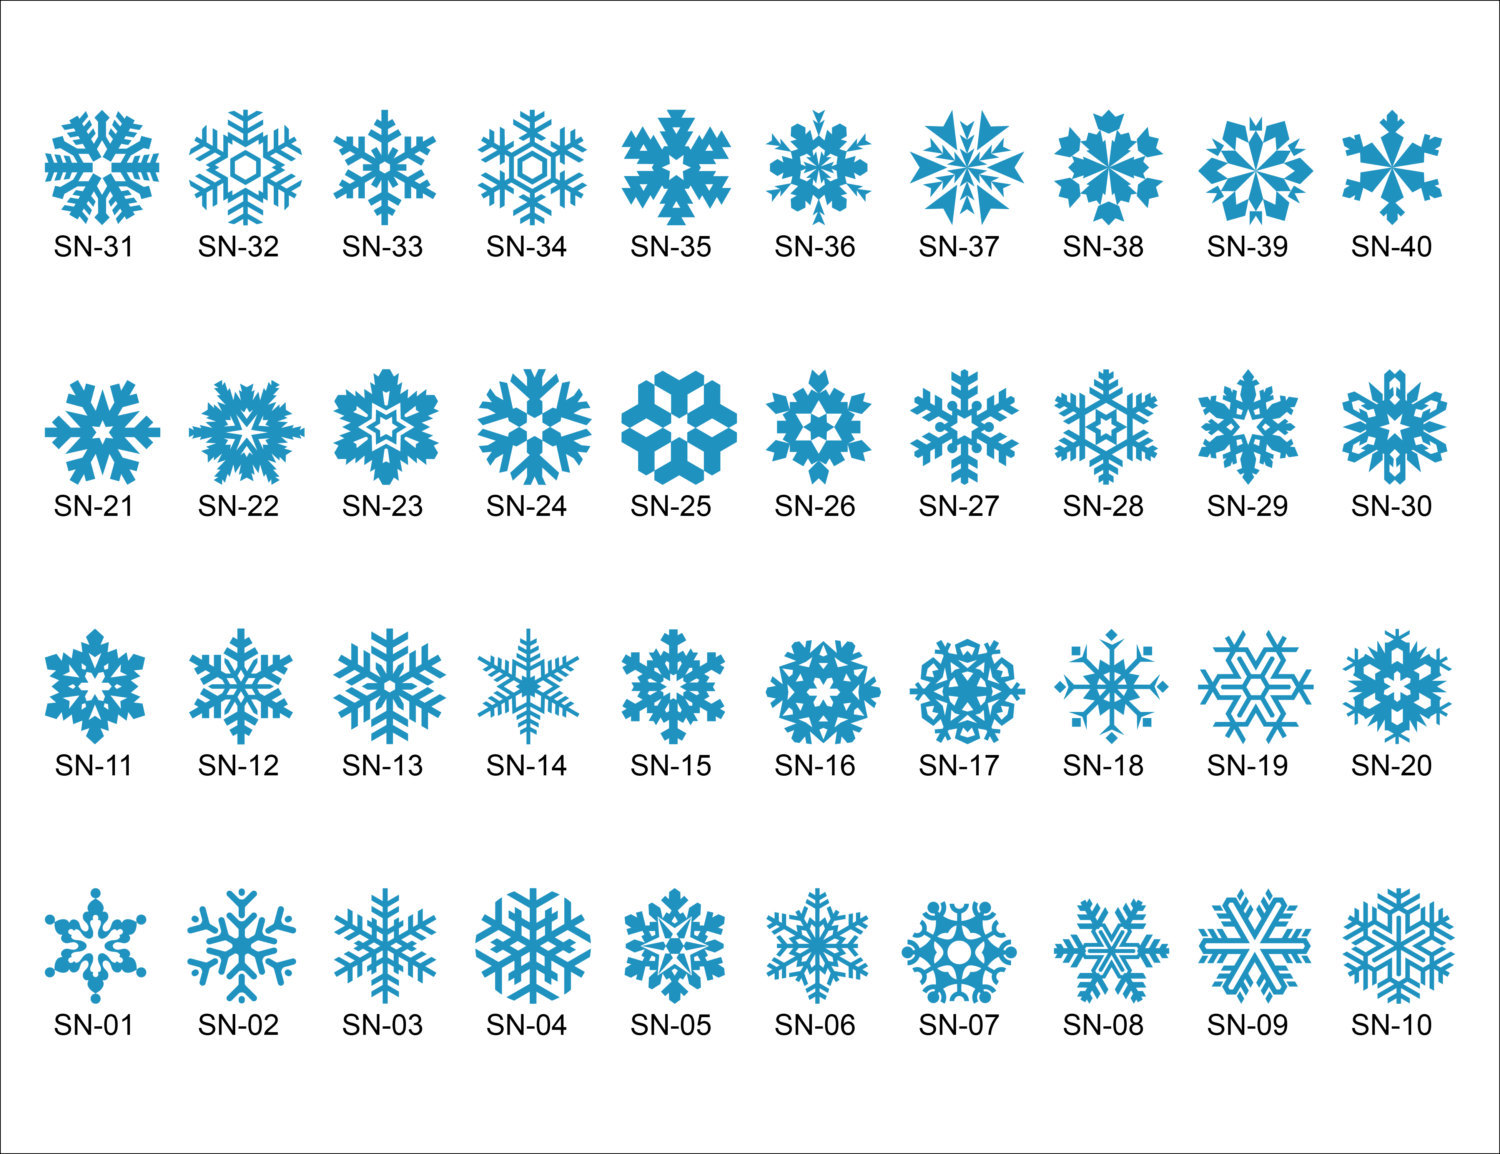 Vinyl-cut 5 inch SNOWFLAKES - 40 different styles - $1.20